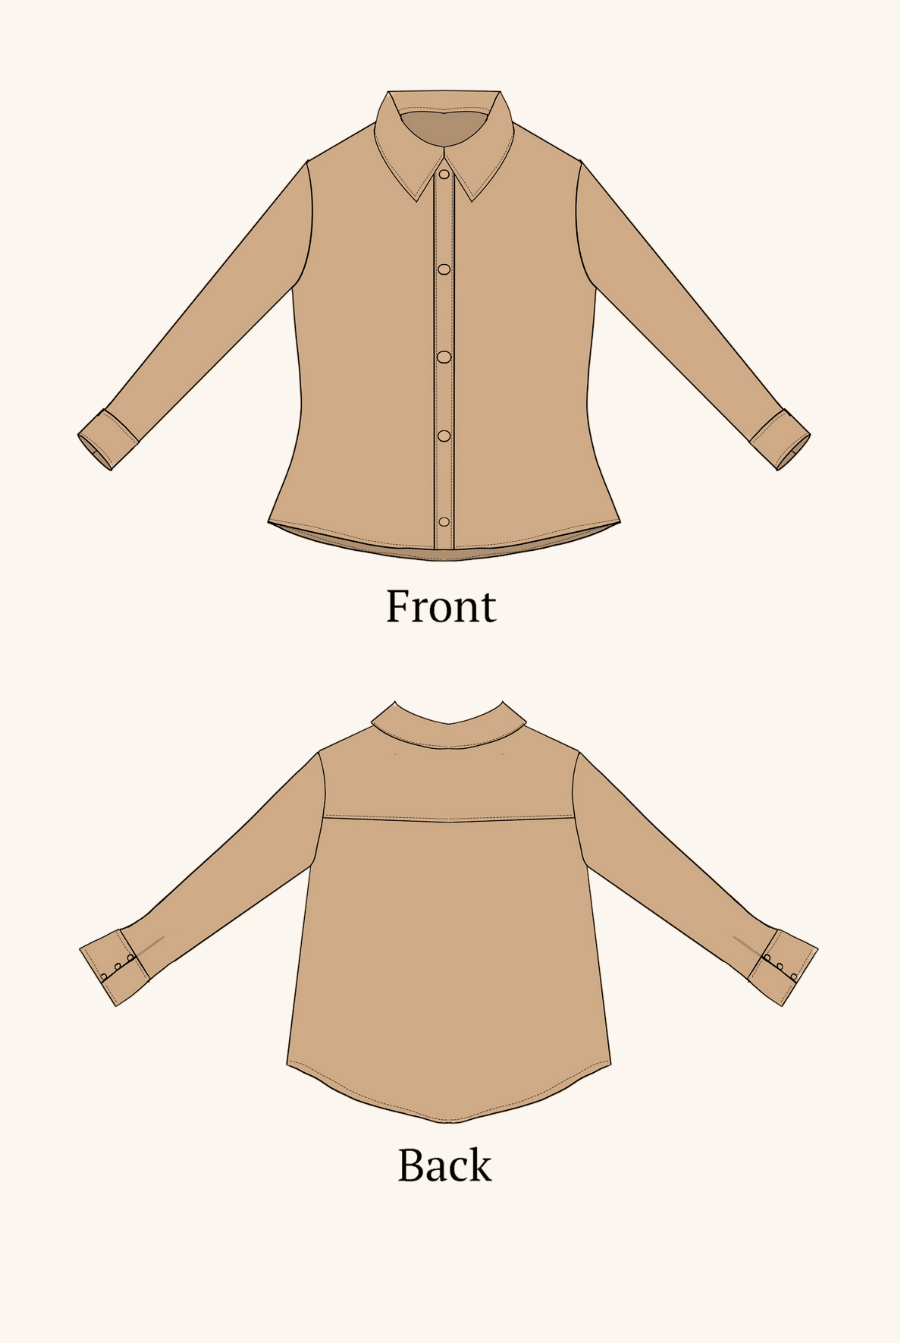 the front and back views of a top made from winslet's button down shirt sewing pattern